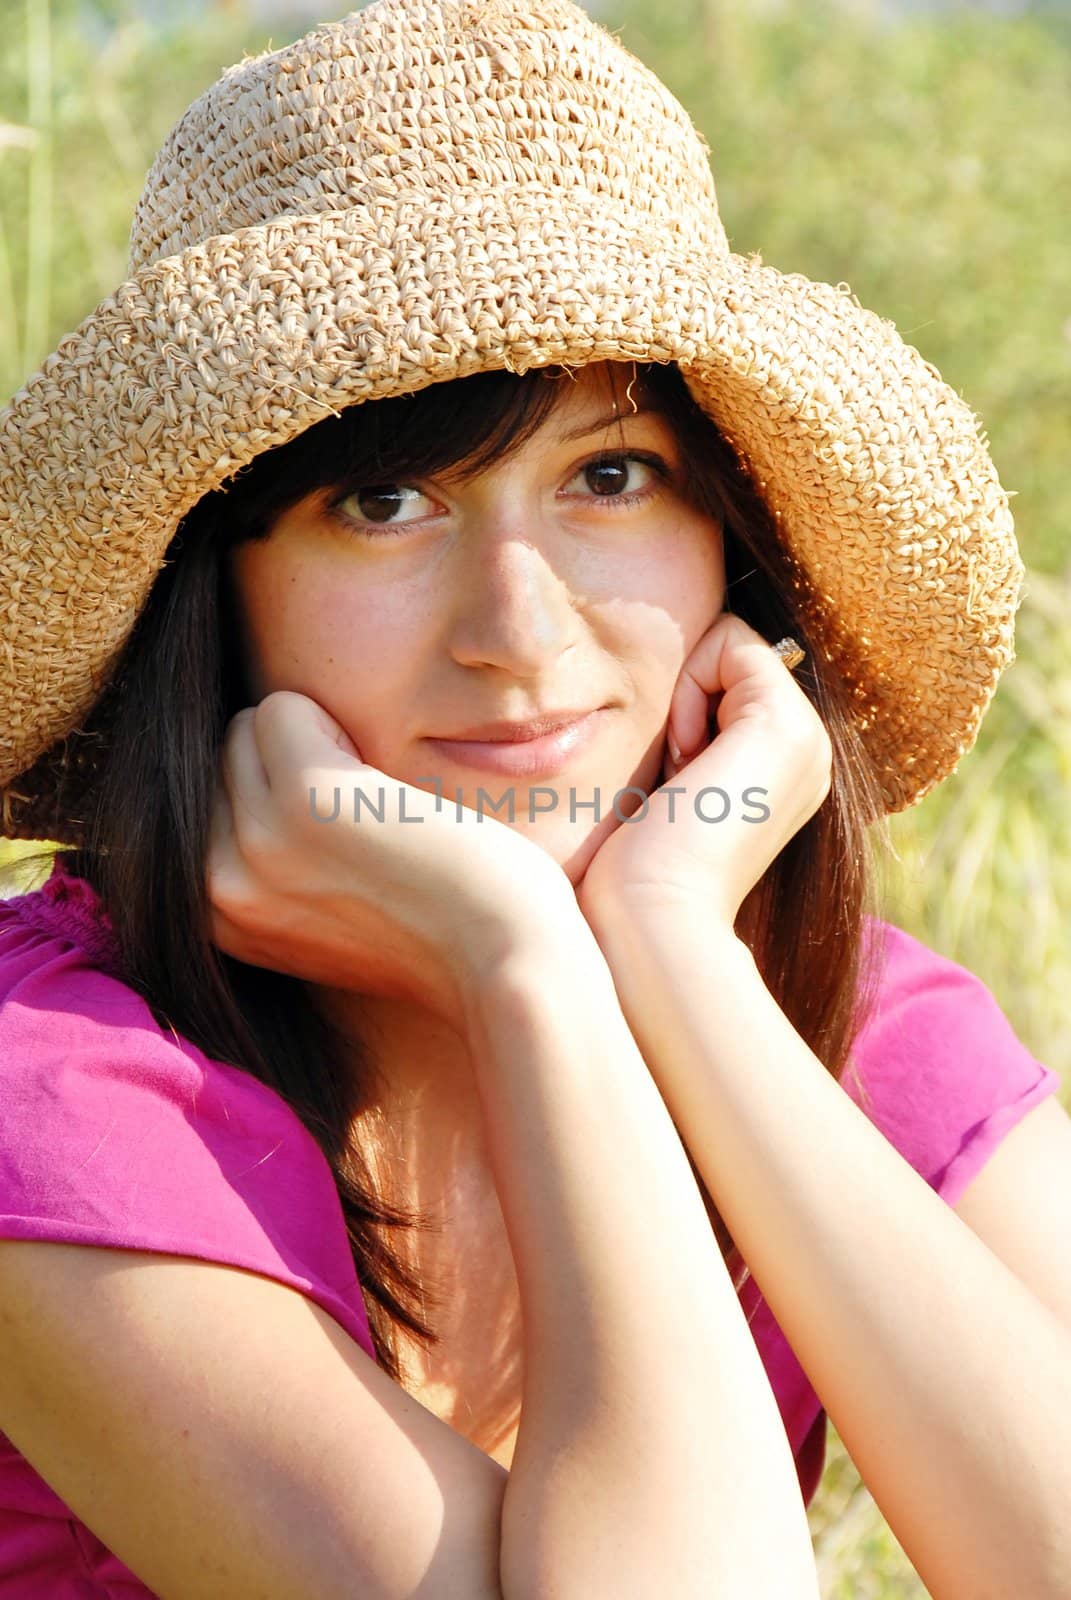 young brunette woman portrait outdoor in straw hat